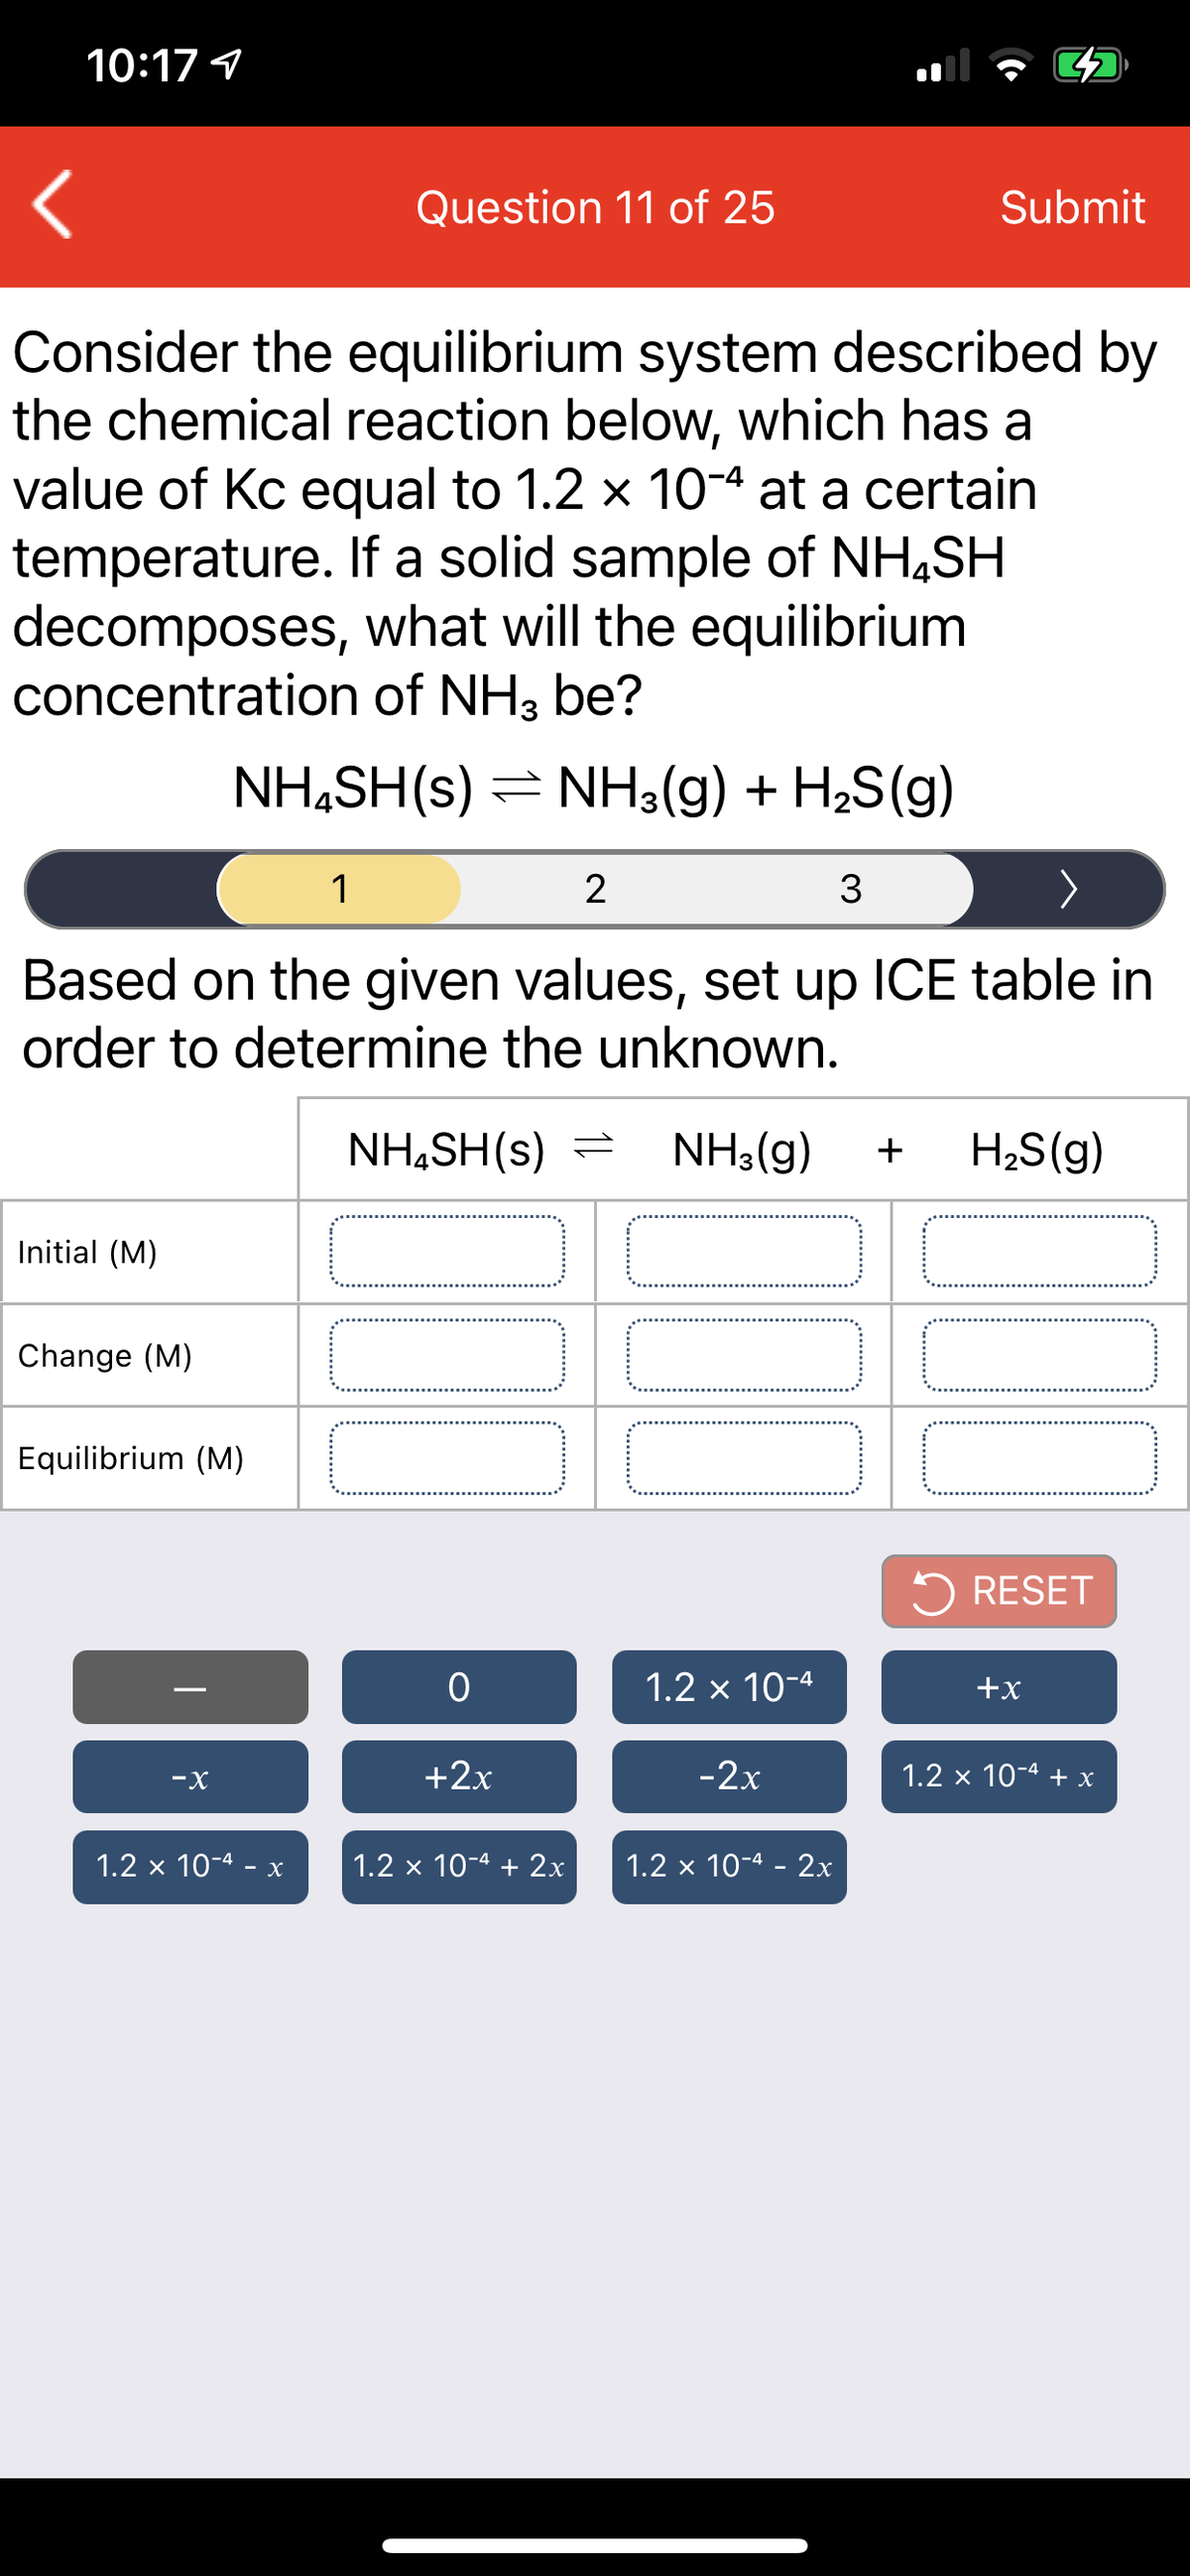 10:17 1
Question 11 of 25
Submit
Consider the equilibrium system described by
the chemical reaction below, which has a
value of Kc equal to 1.2 x 10-4 at a certain
temperature. If a solid sample of NH,SH
decomposes, what will the equilibrium
concentration of NH3 be?
NH,SH(s) = NH3(g) + H2S(g)
1
2
Based on the given values, set up ICE table in
order to determine the unknown.
NH,SH(s) =
NH3(g)
+
H;S(g)
Initial (M)
Change (M)
Equilibrium (M)
5 RESET
1.2 x 10-4
+x
-X
+2x
-2x
1.2 x 10-4 +х
1.2 x 10-4 -
1.2 x 10-4 + 2x
1.2 x 10-4 - 2x
